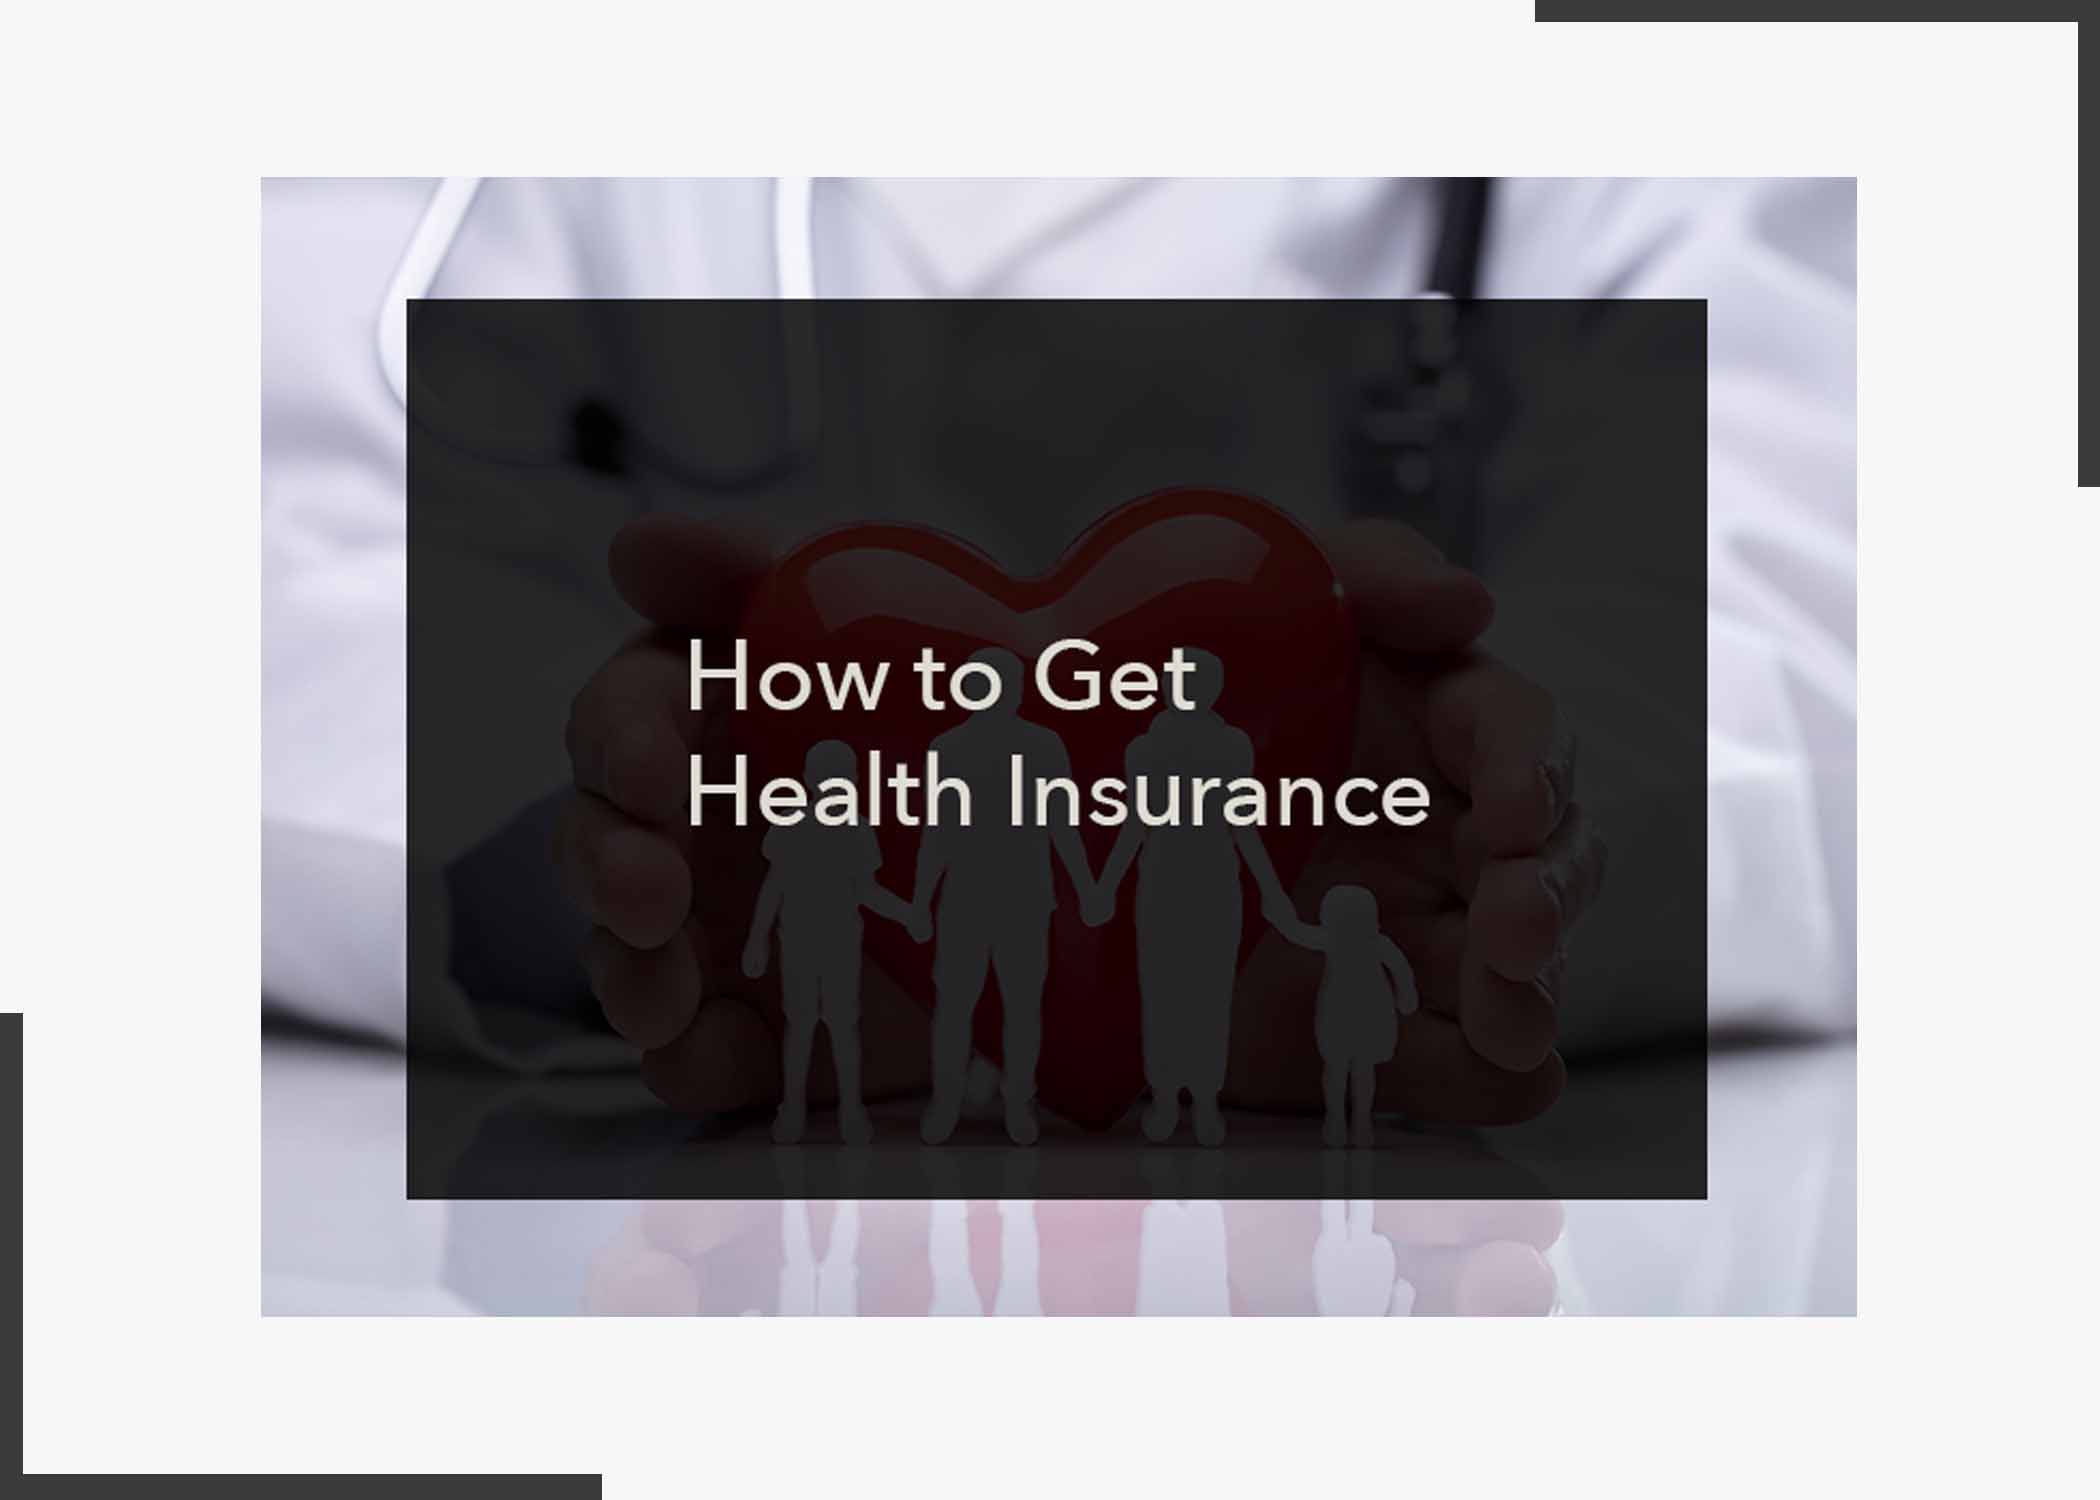 How to Get Health Insurance